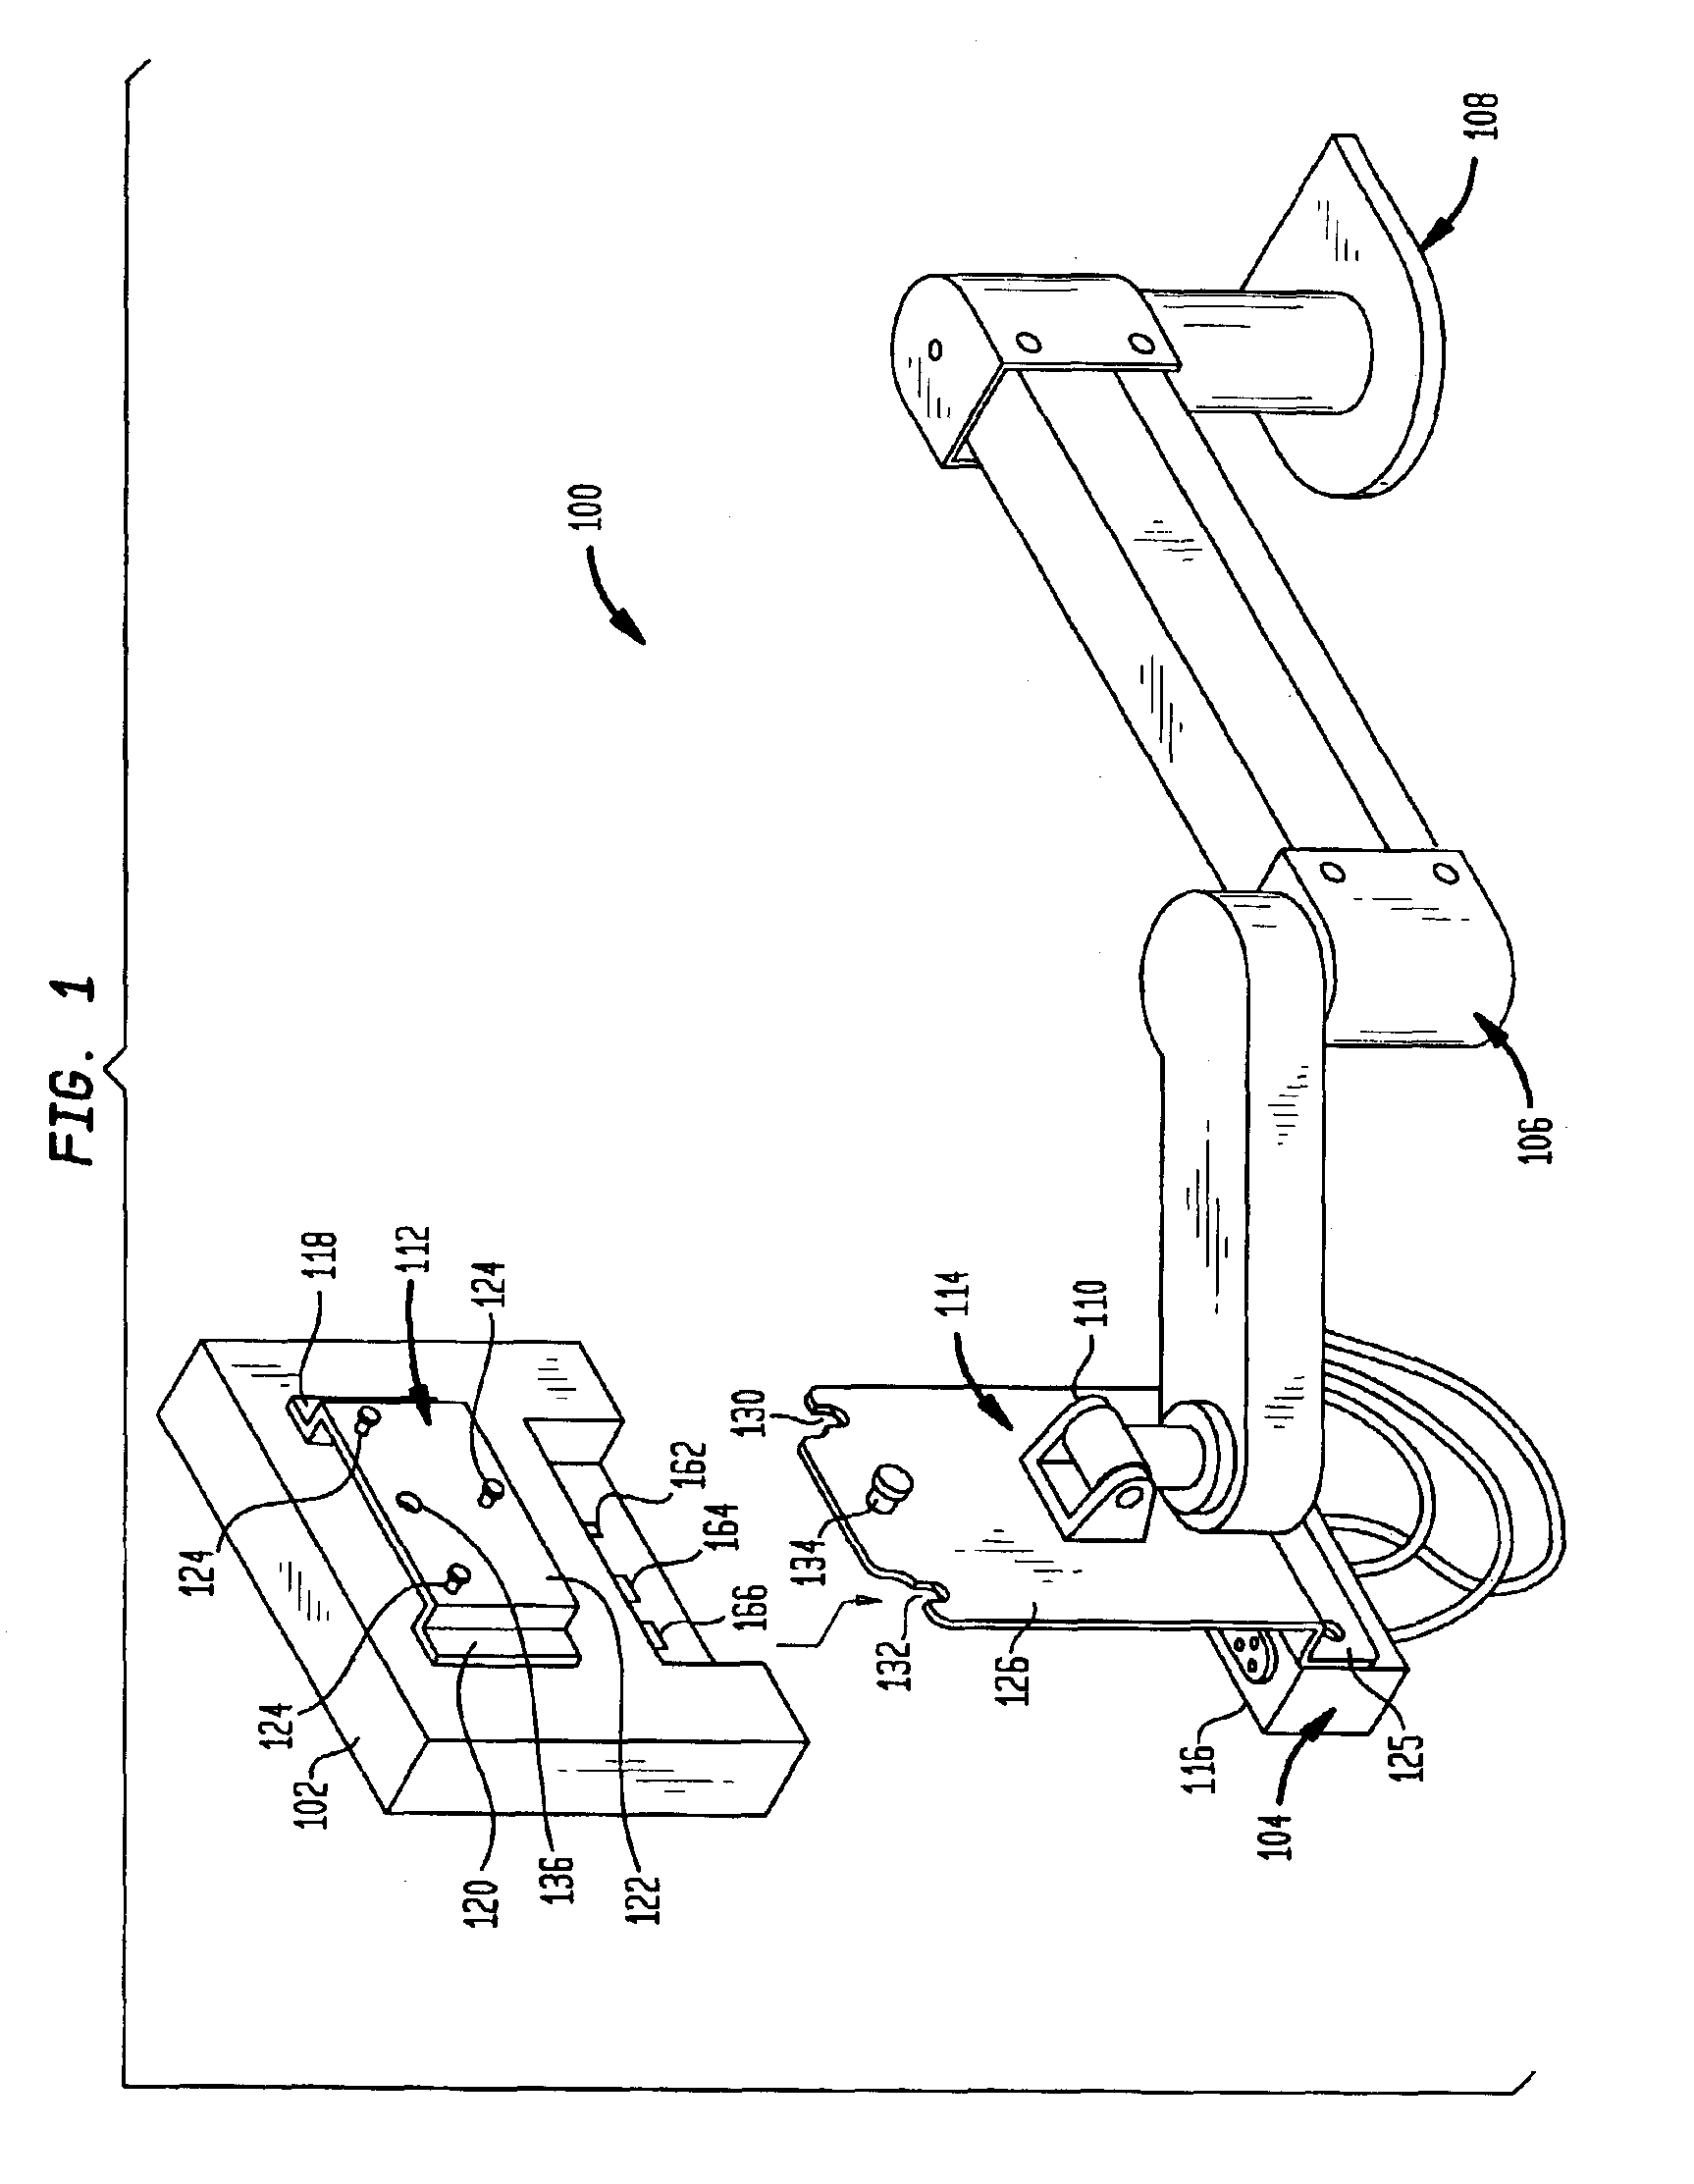 Quick interconnection system for electronic devices